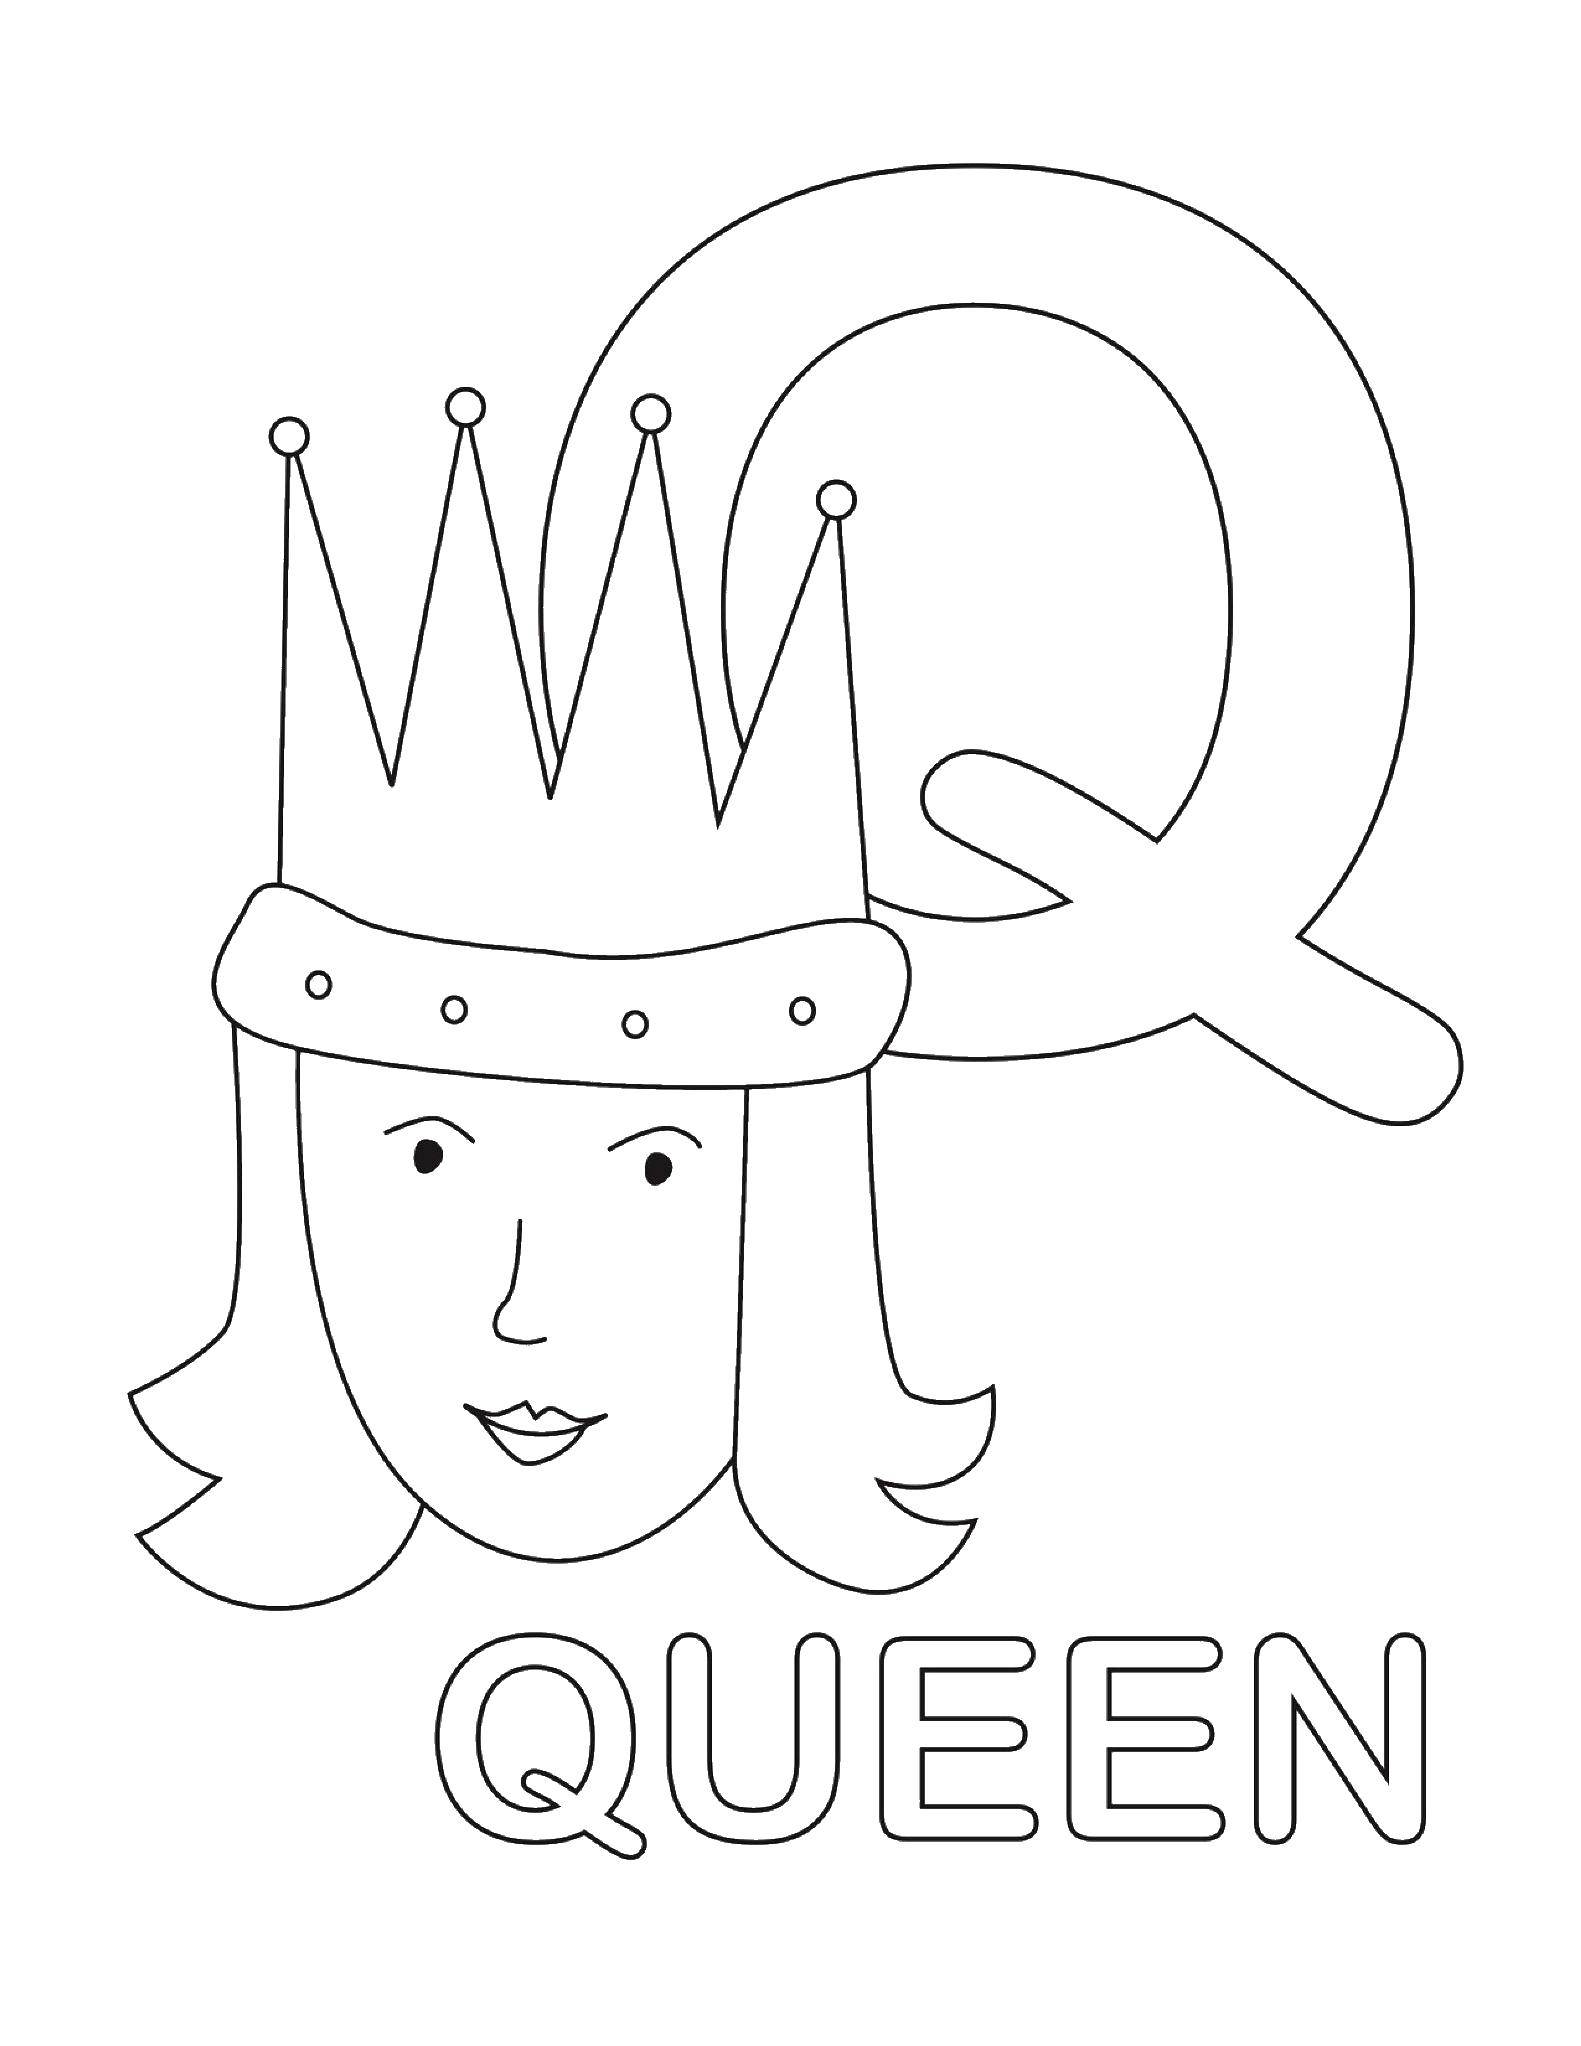 Coloring Queen. Category English words. Tags:  English words Queen.